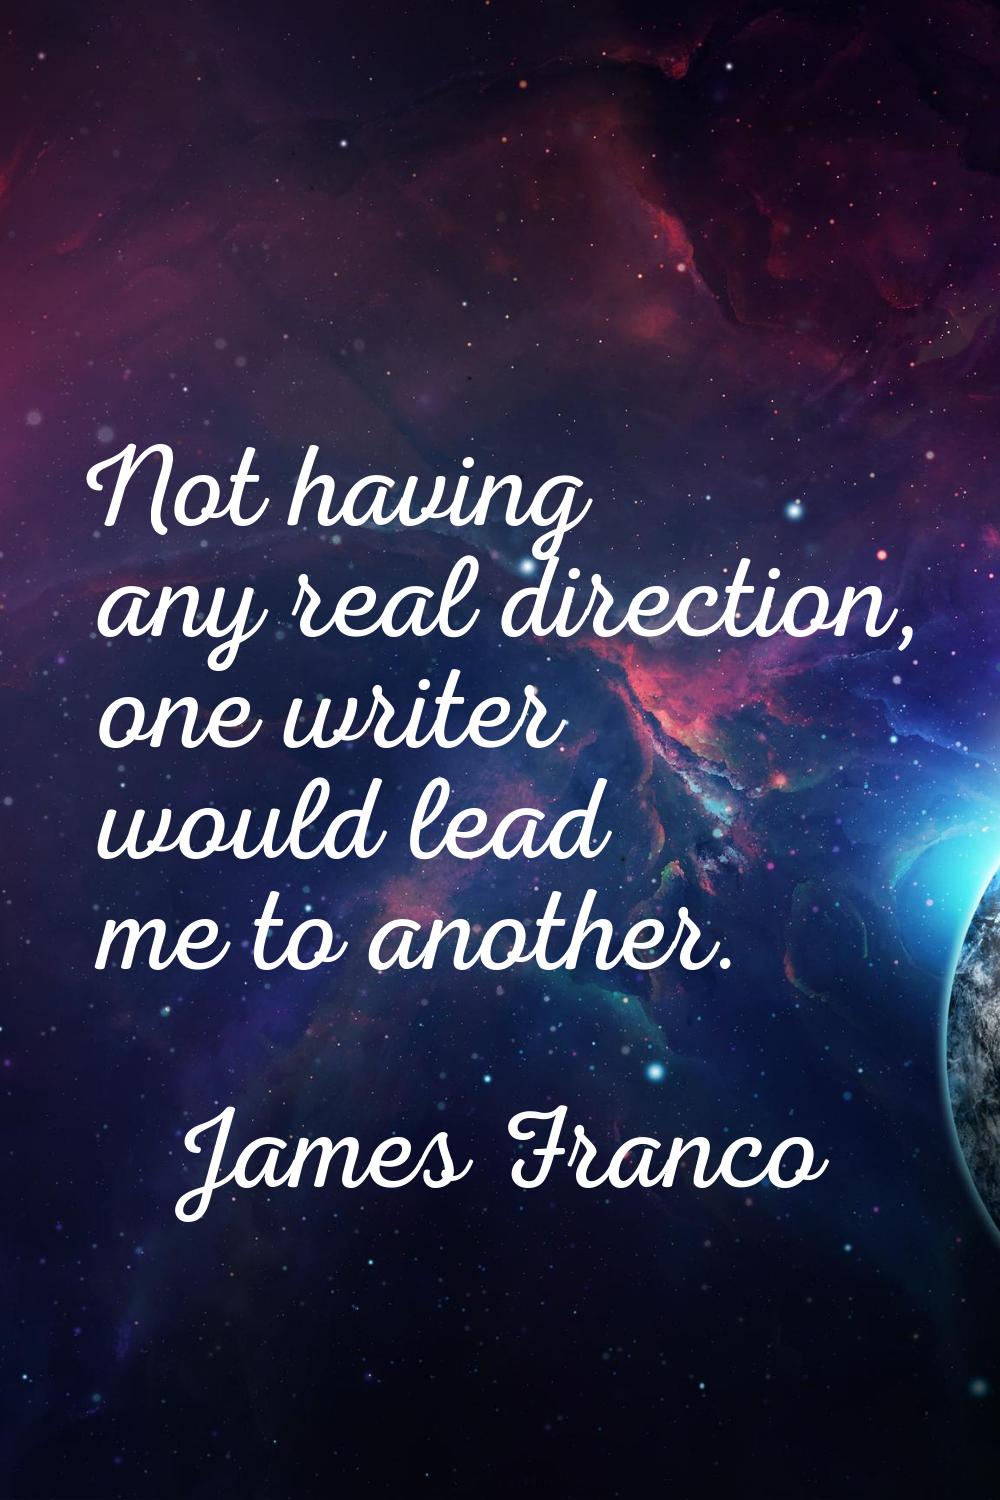 Not having any real direction, one writer would lead me to another.